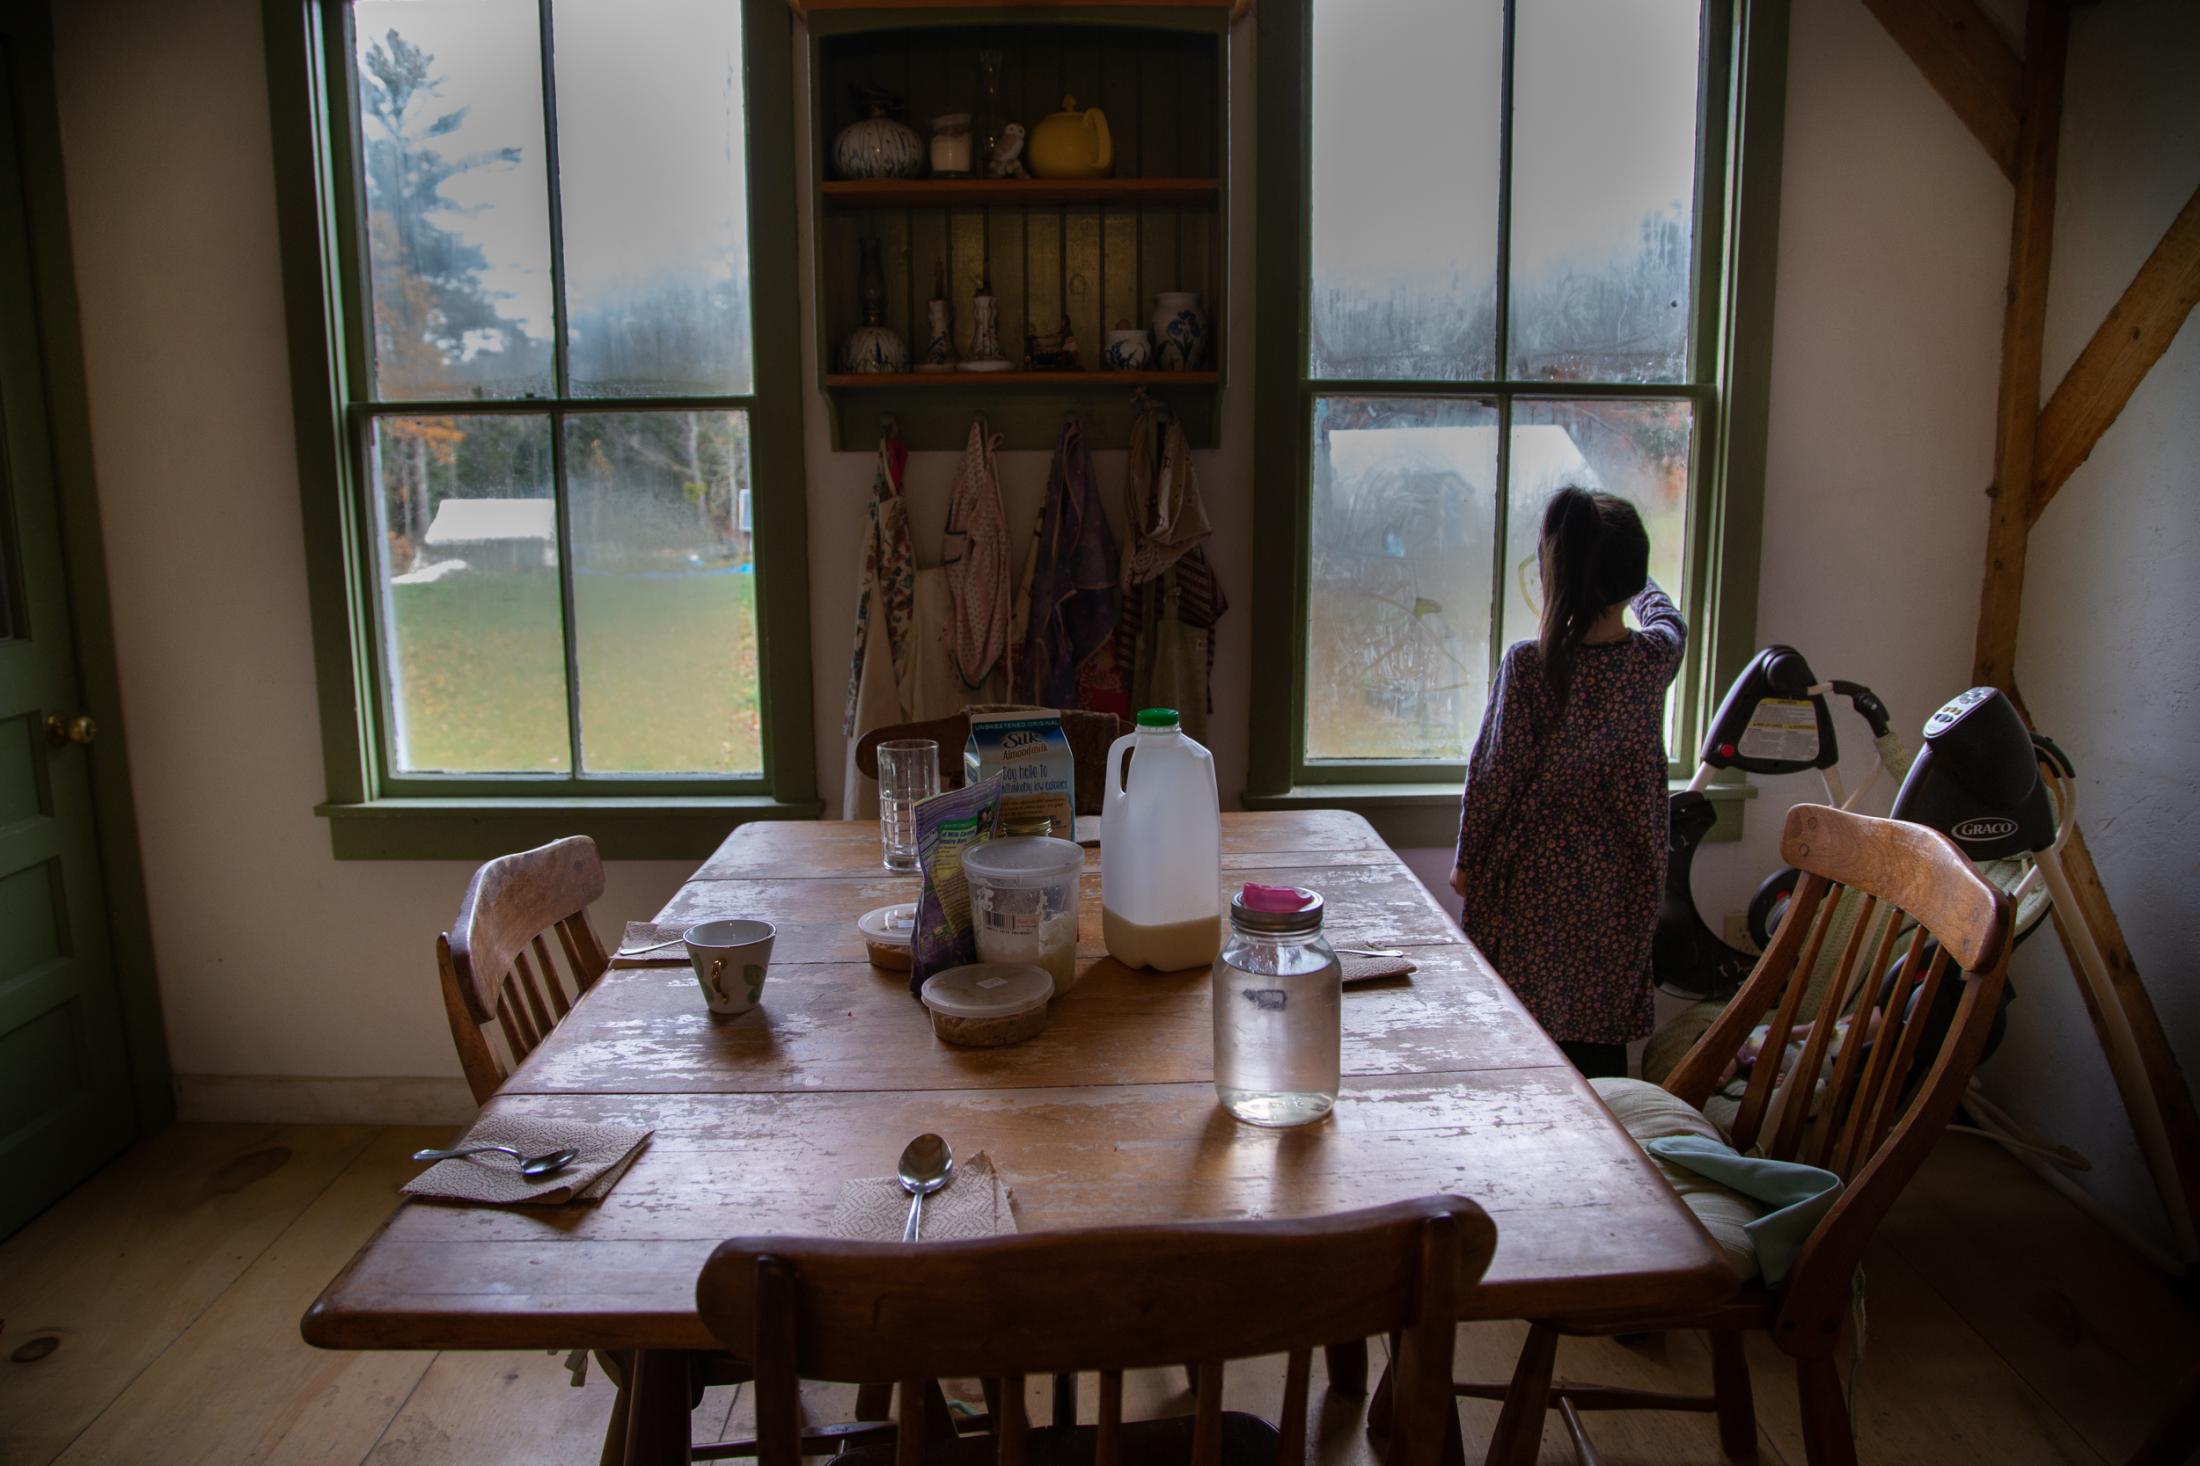 Lydia awaits for her breakfast while she draws on her home window, Bremen, Maine, 2014.